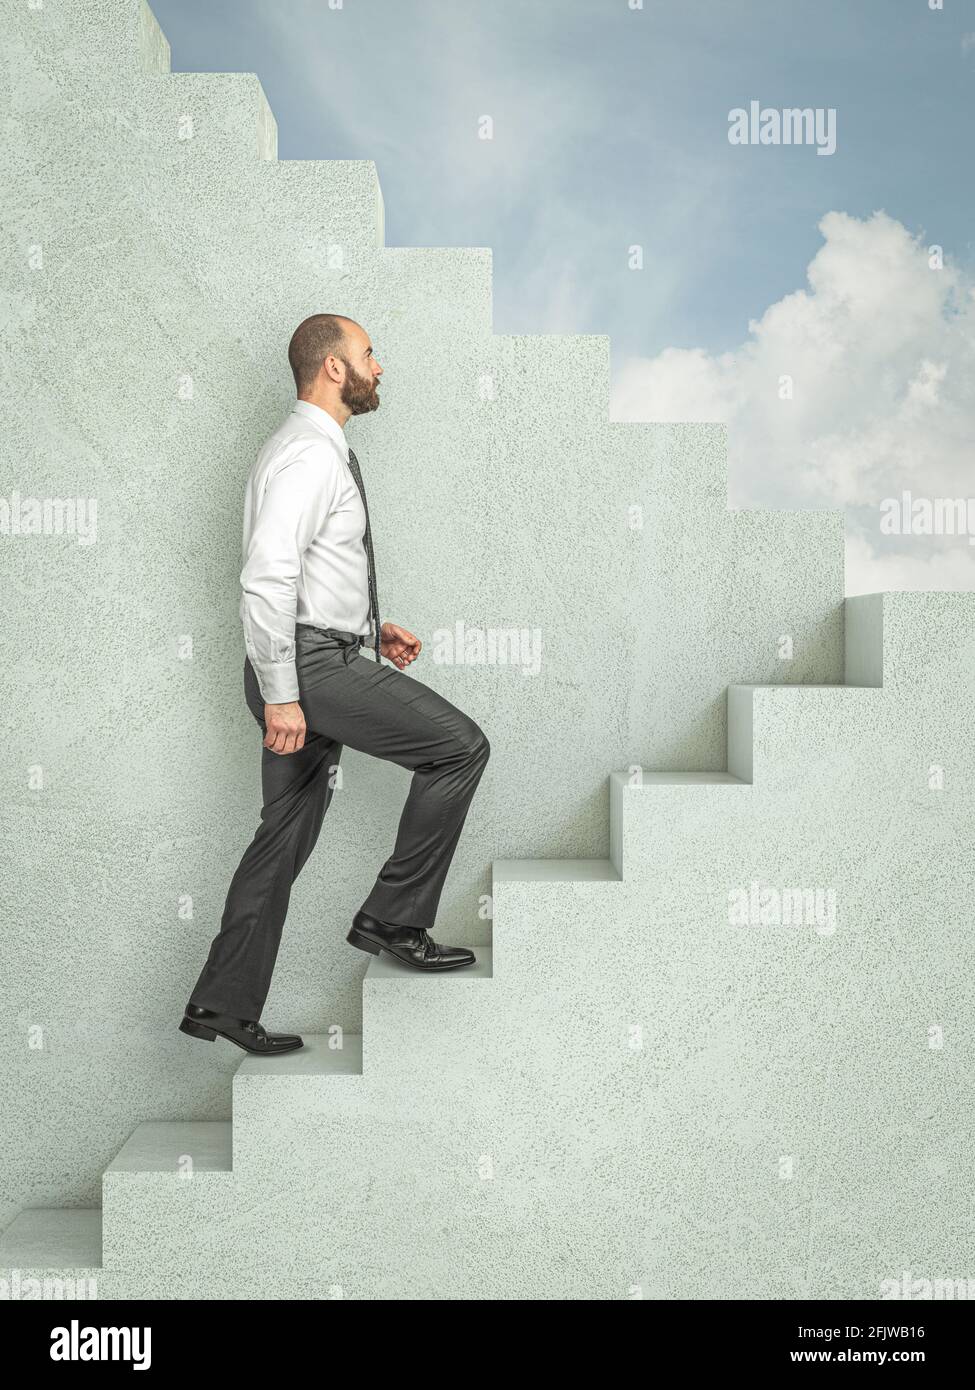 businessman climbs the stairs. concept of success, aspiration, promotion. Stock Photo